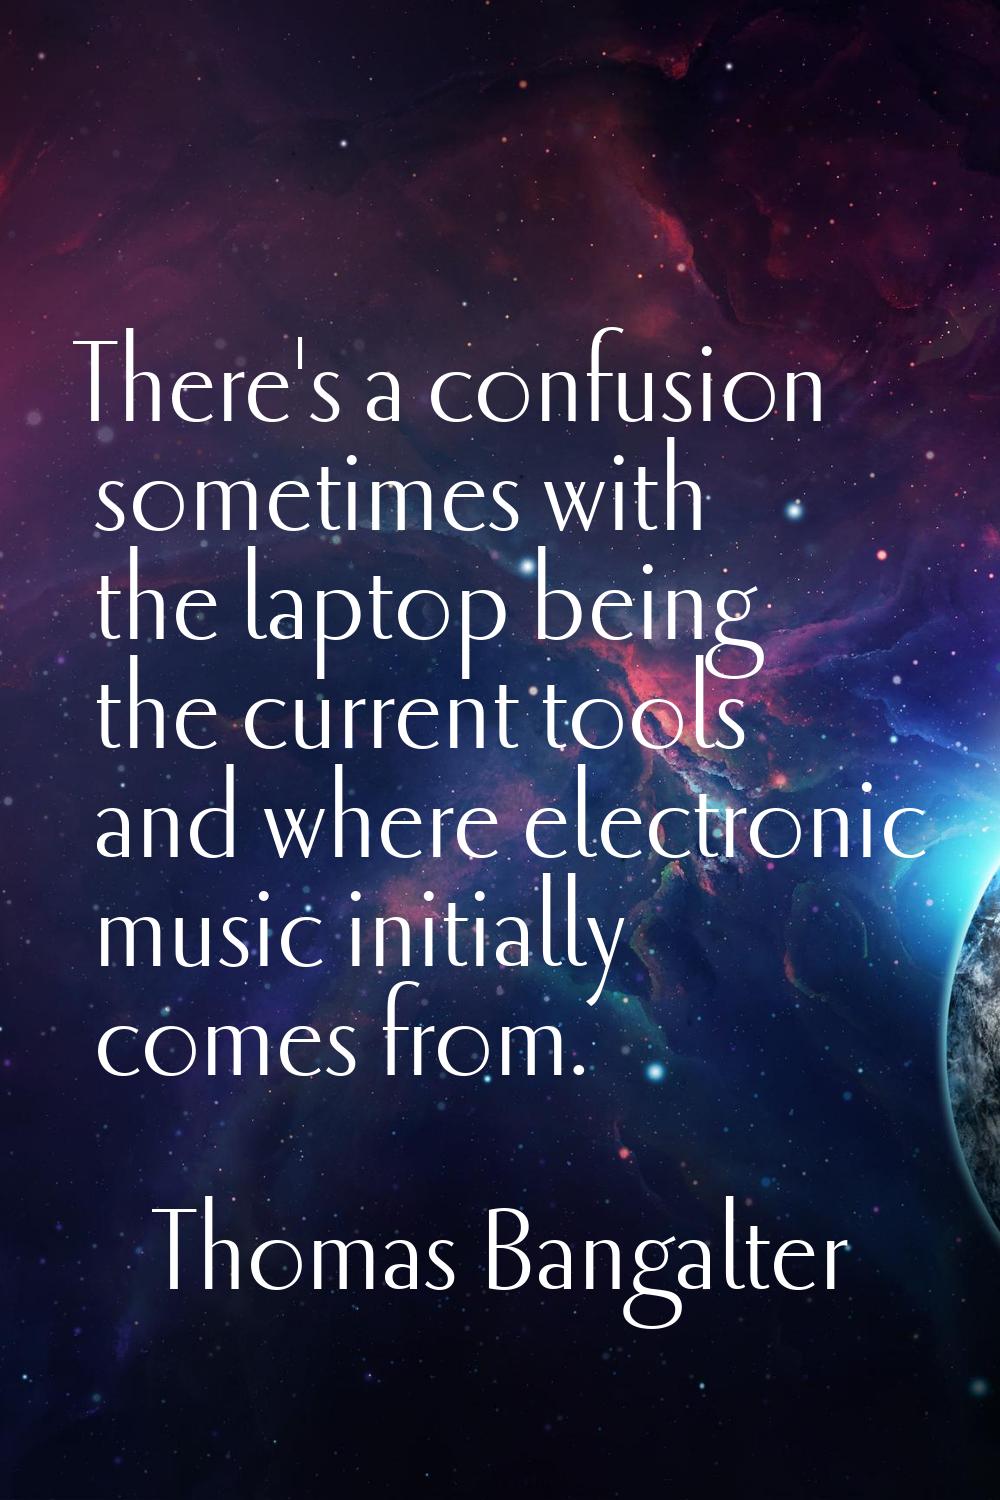 There's a confusion sometimes with the laptop being the current tools and where electronic music in